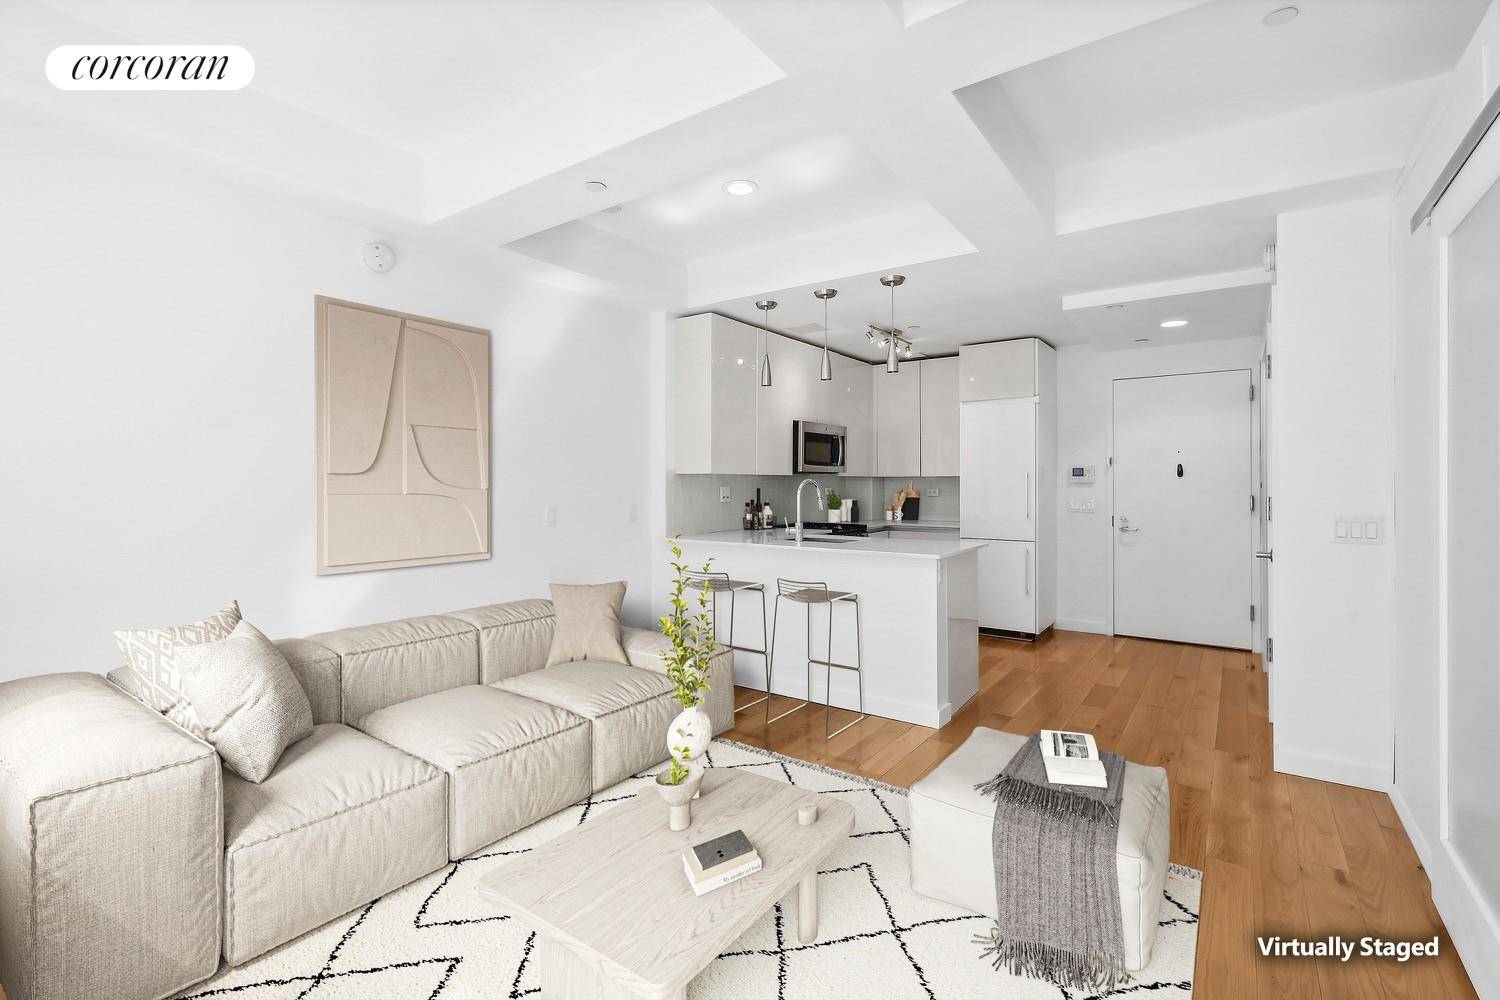 Welcome to The Style, Harlem's latest Condominium.